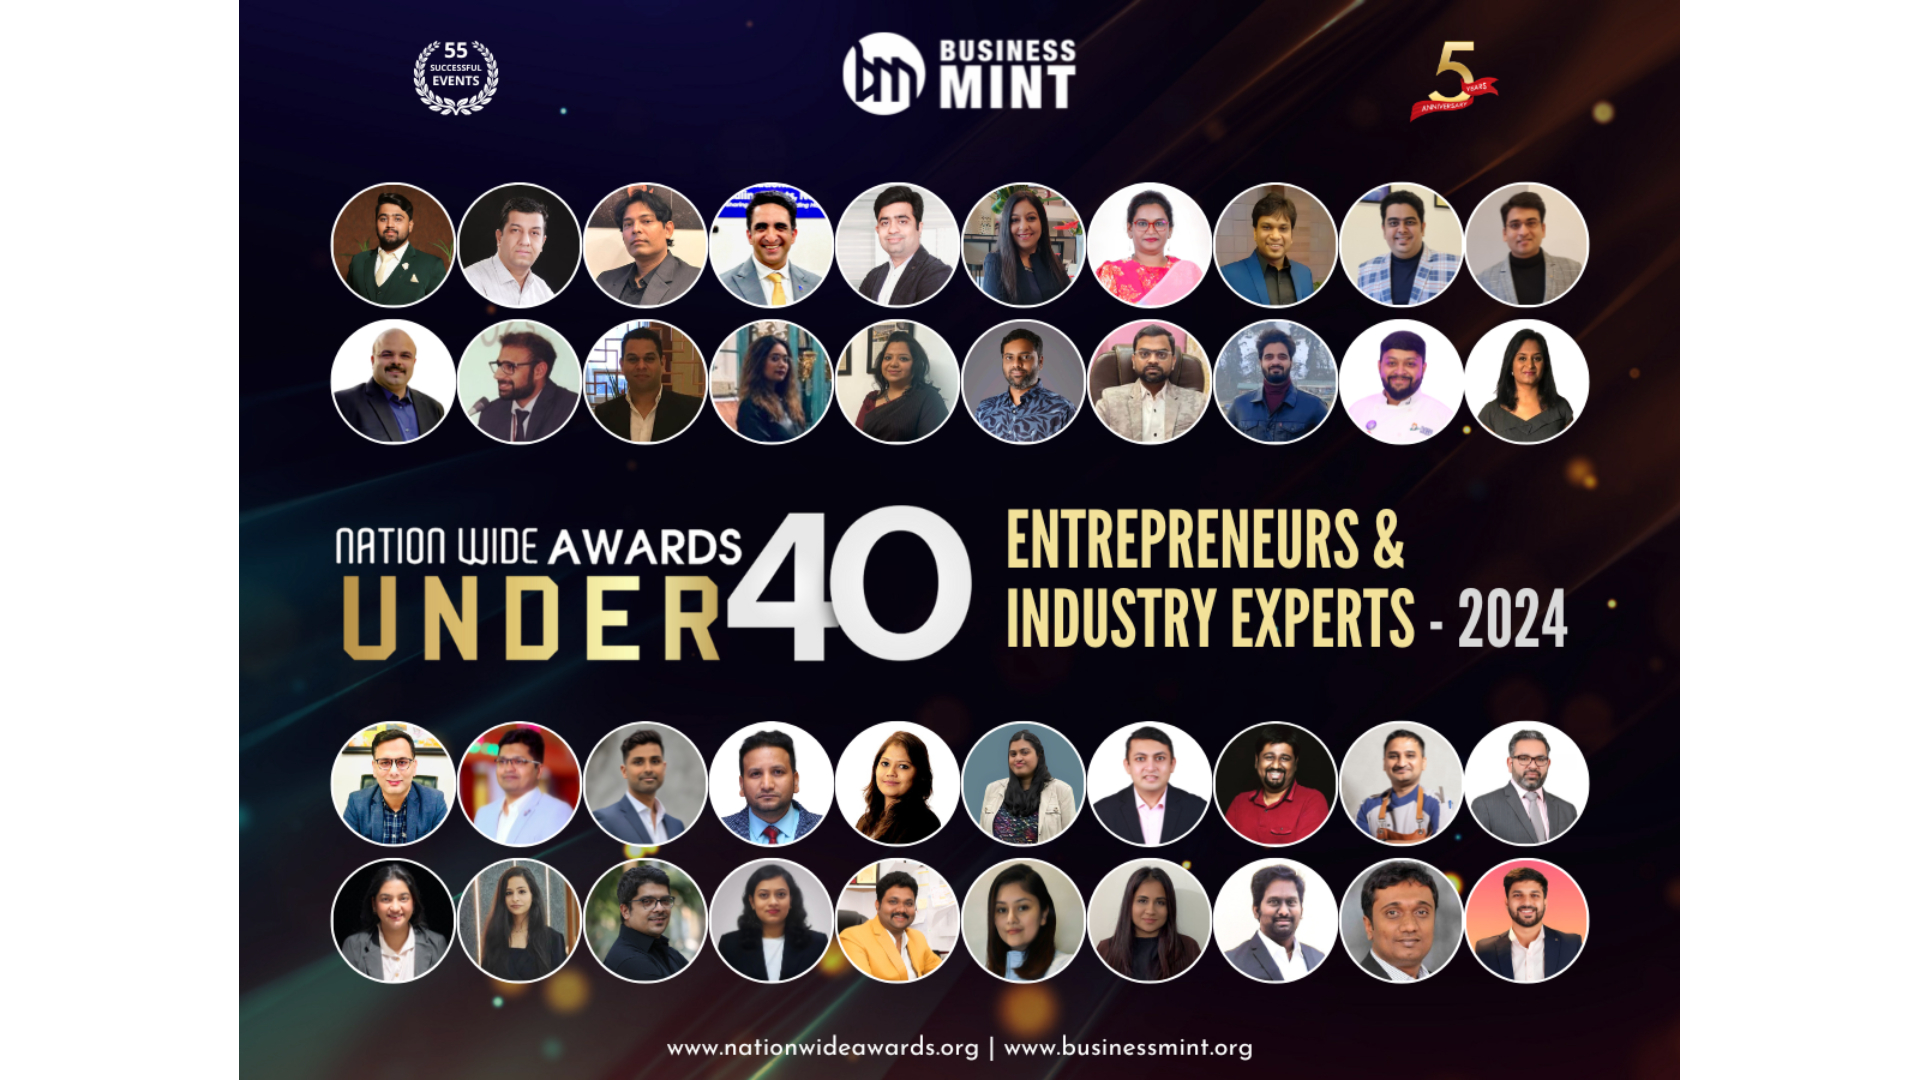 Business Mint proudly reveals the triumphant victors of the fourth iteration of the Nationwide Awards Under 40 Entrepreneurs & Industry Experts - 2024